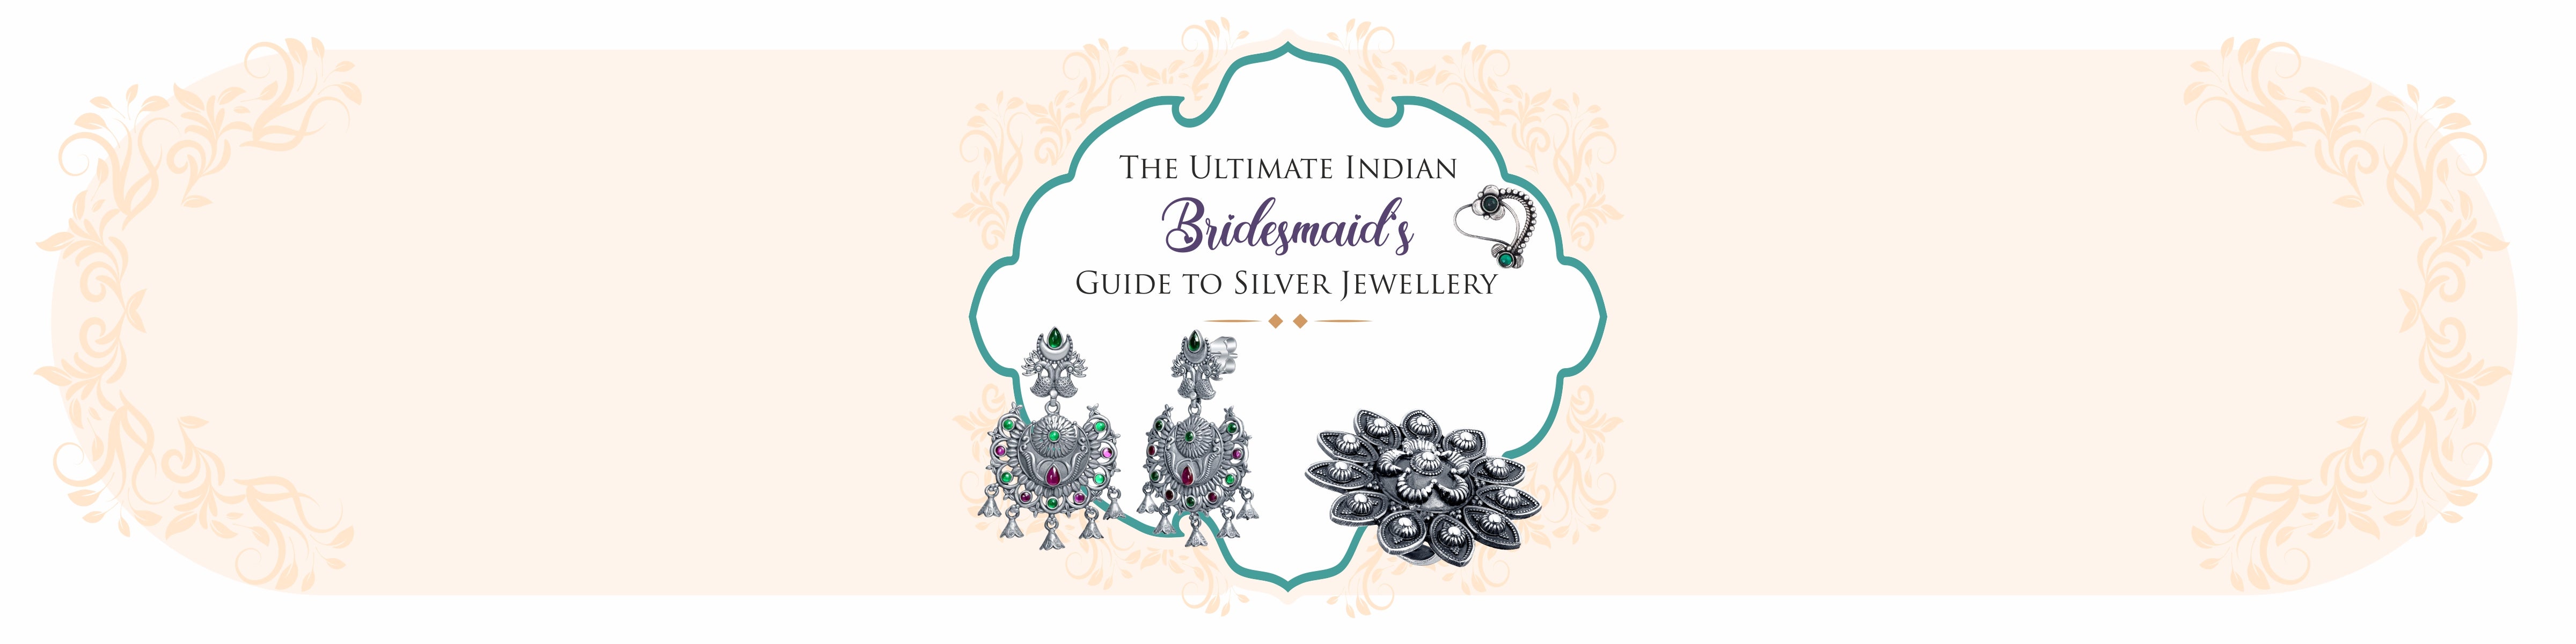 The Ultimate Indian Bridesmaid's Guide to Sterling Silver Jewellery